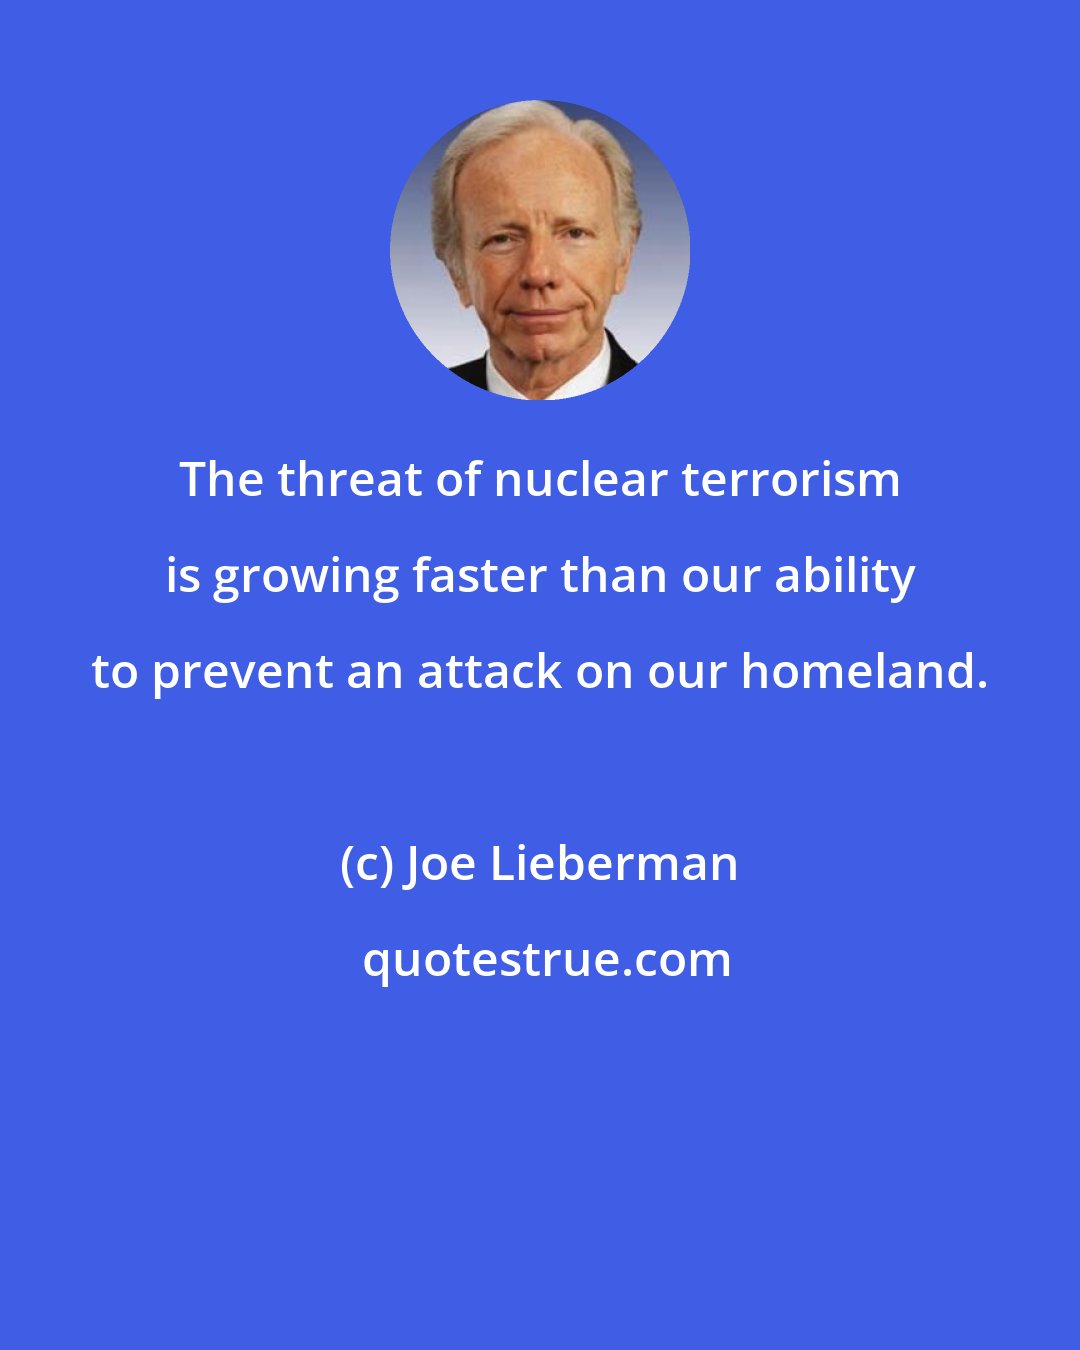 Joe Lieberman: The threat of nuclear terrorism is growing faster than our ability to prevent an attack on our homeland.